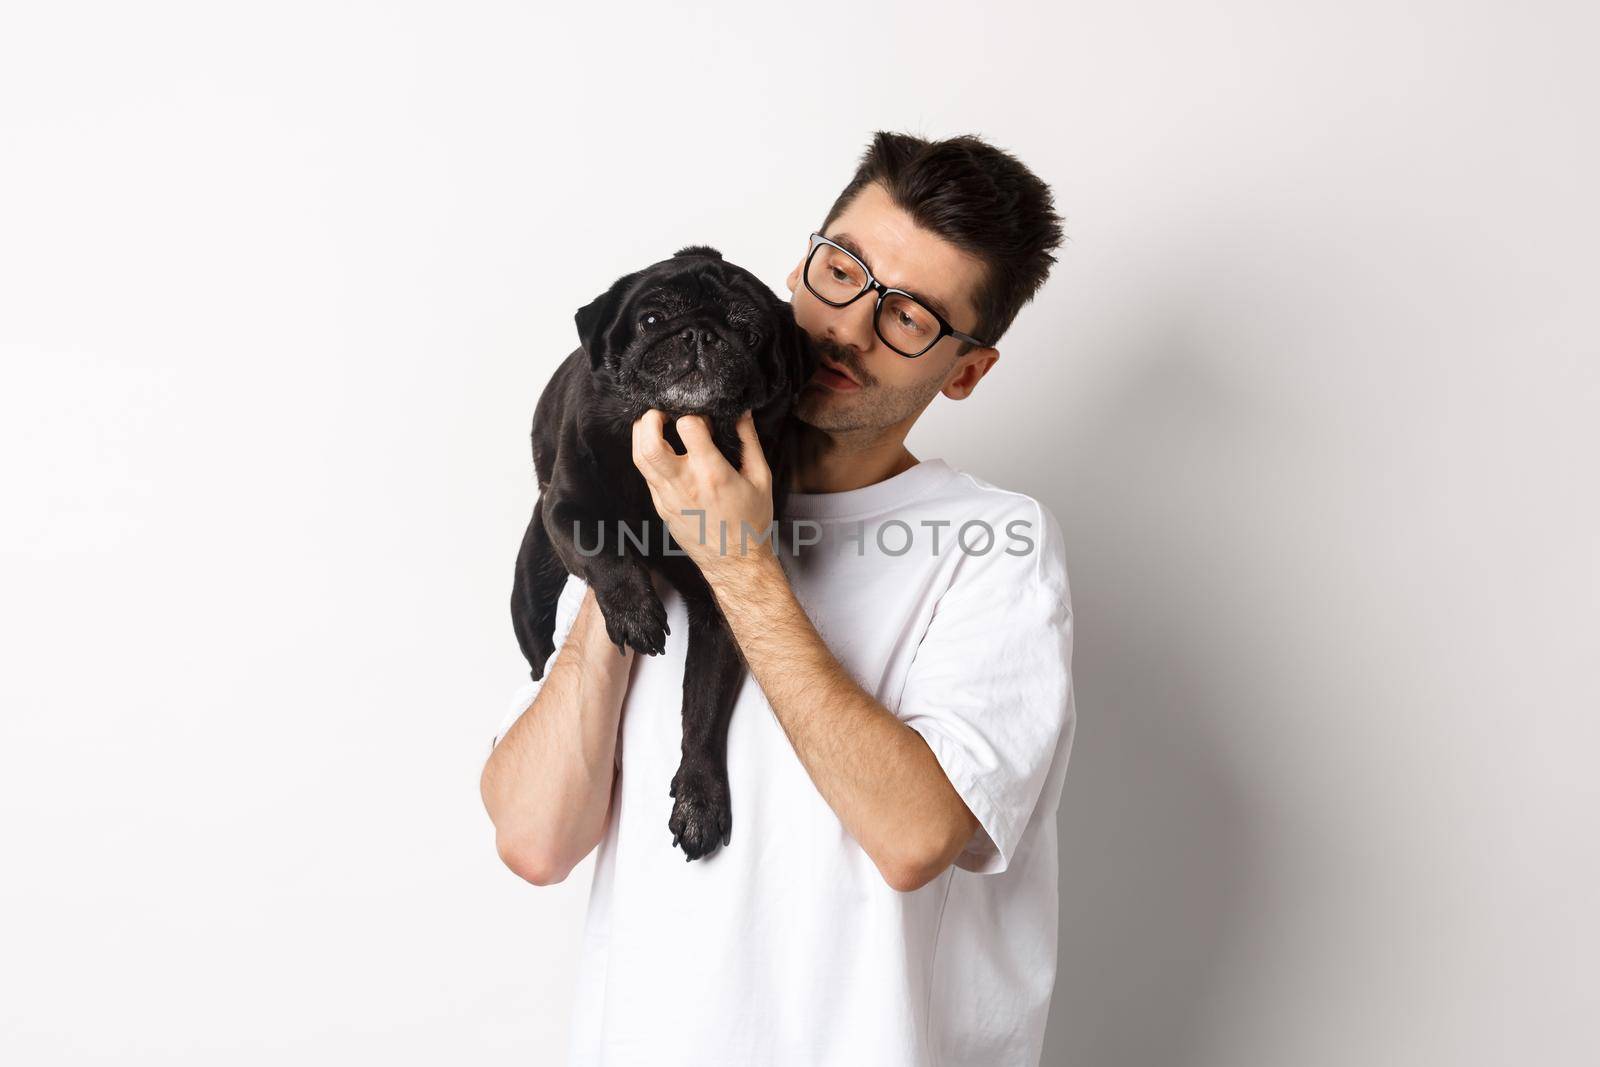 Handsome young man pet his cute black dog, scratching pug while holding animal on shoulder, standing over white background.